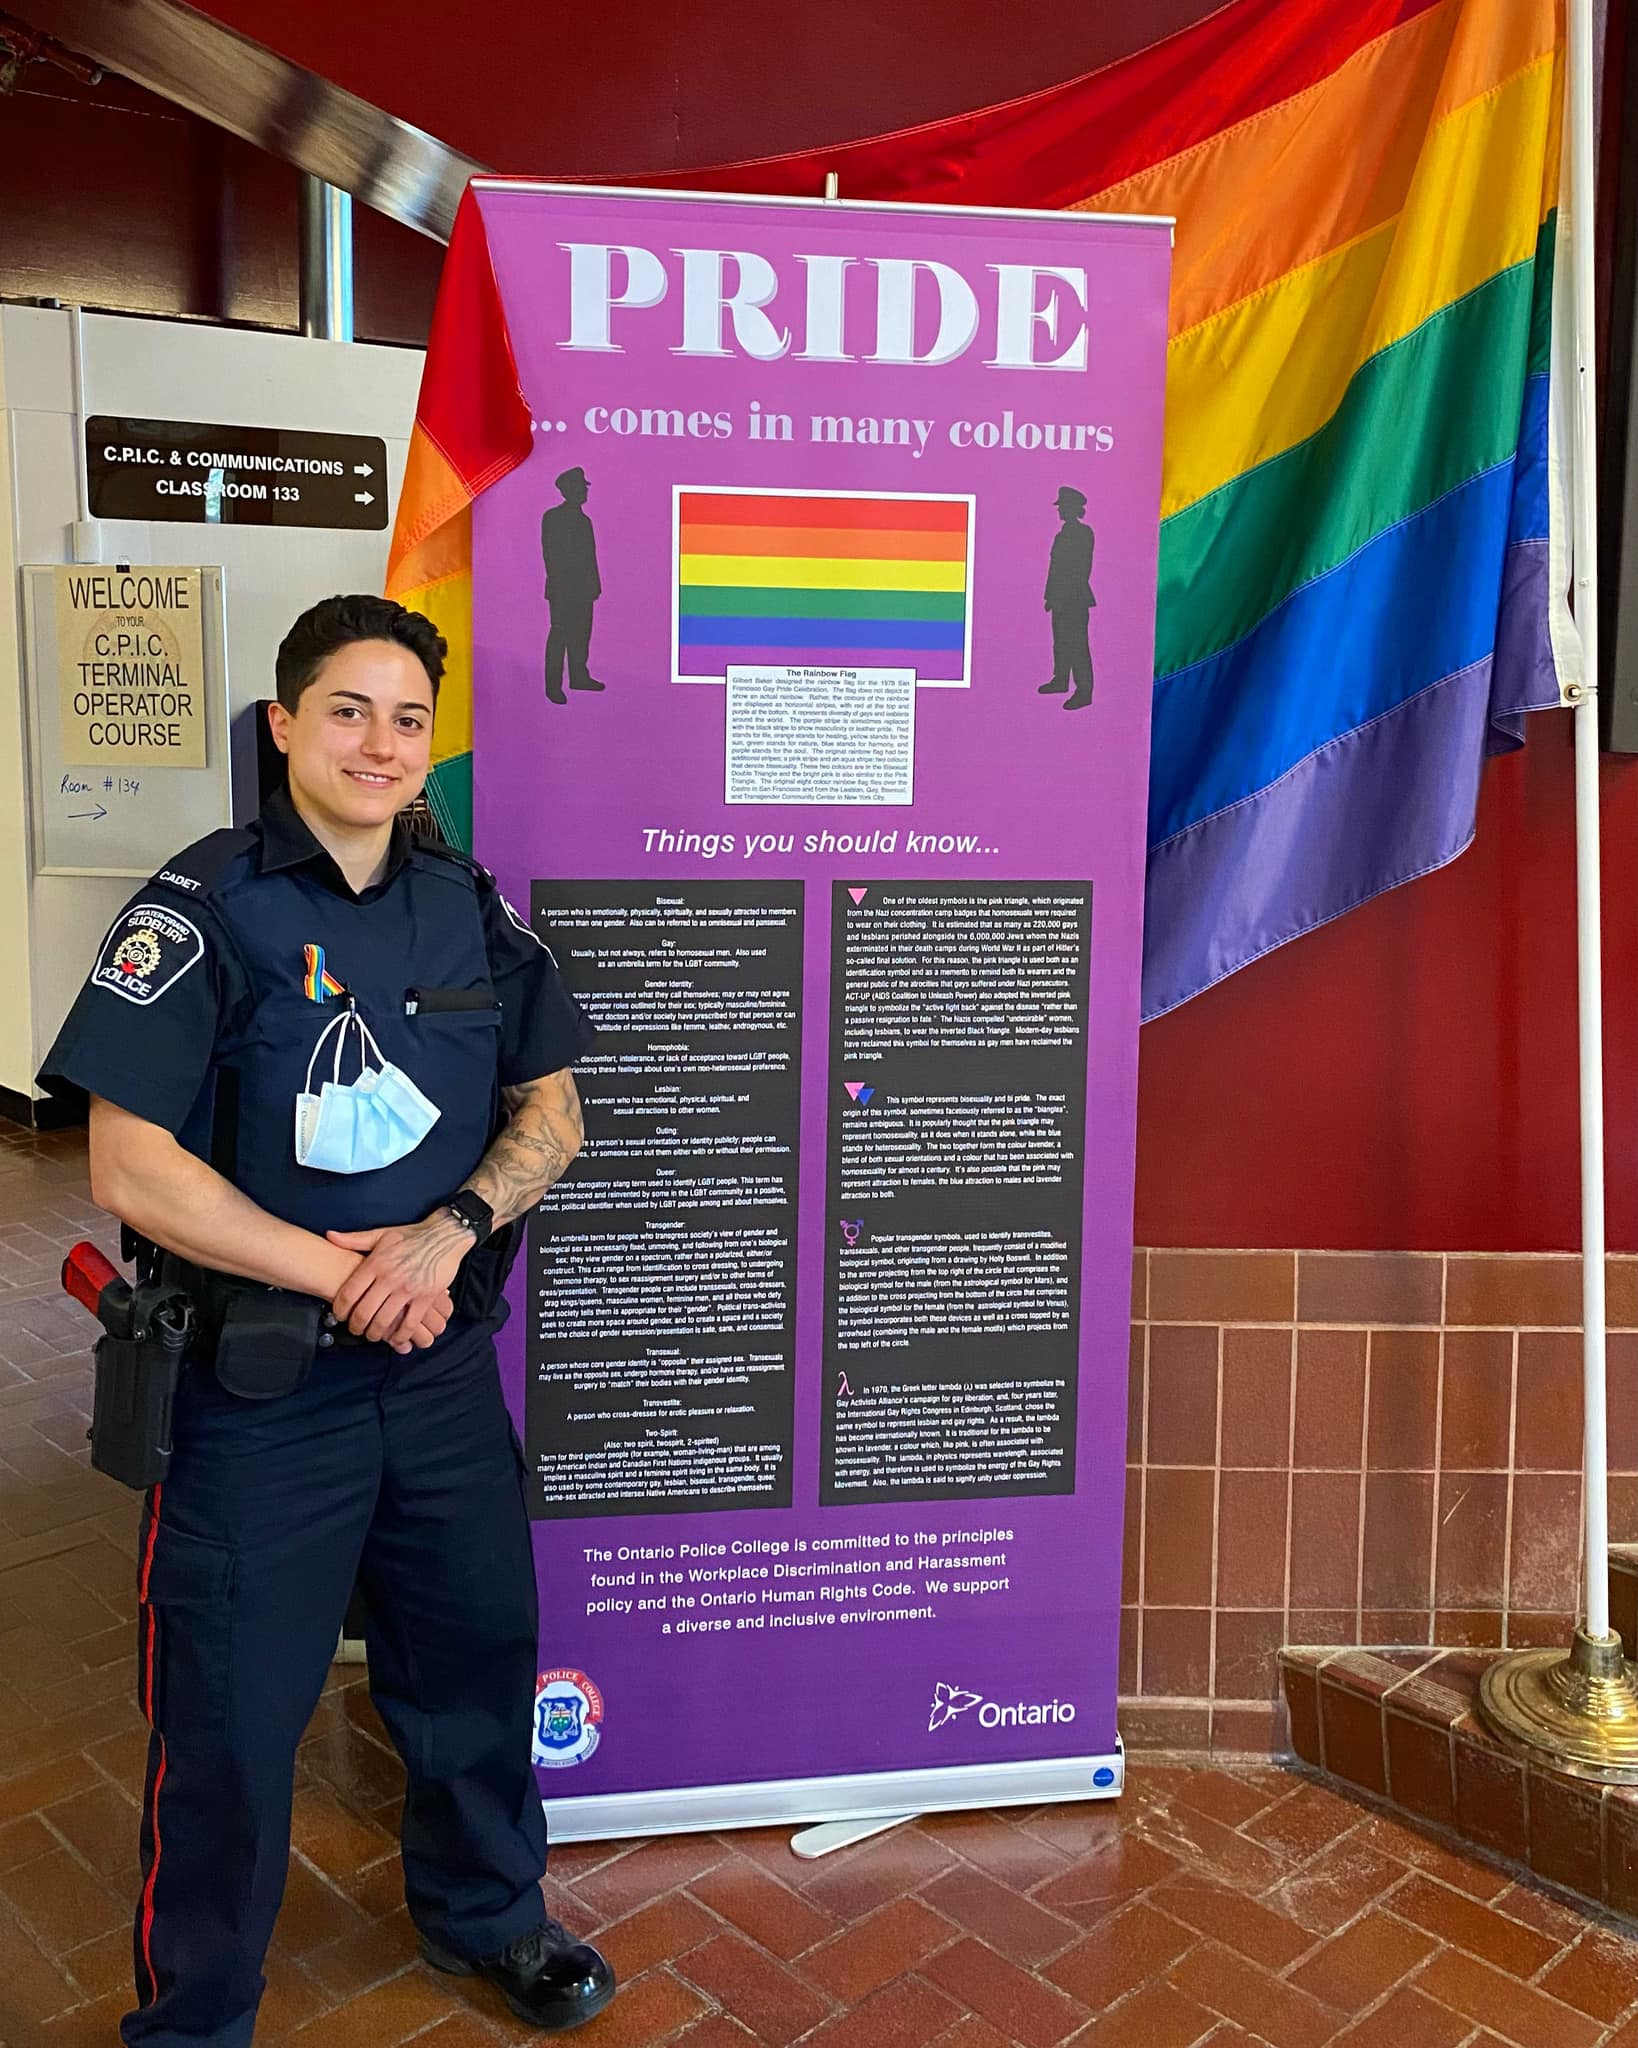 person standing in front of pride flag and banner